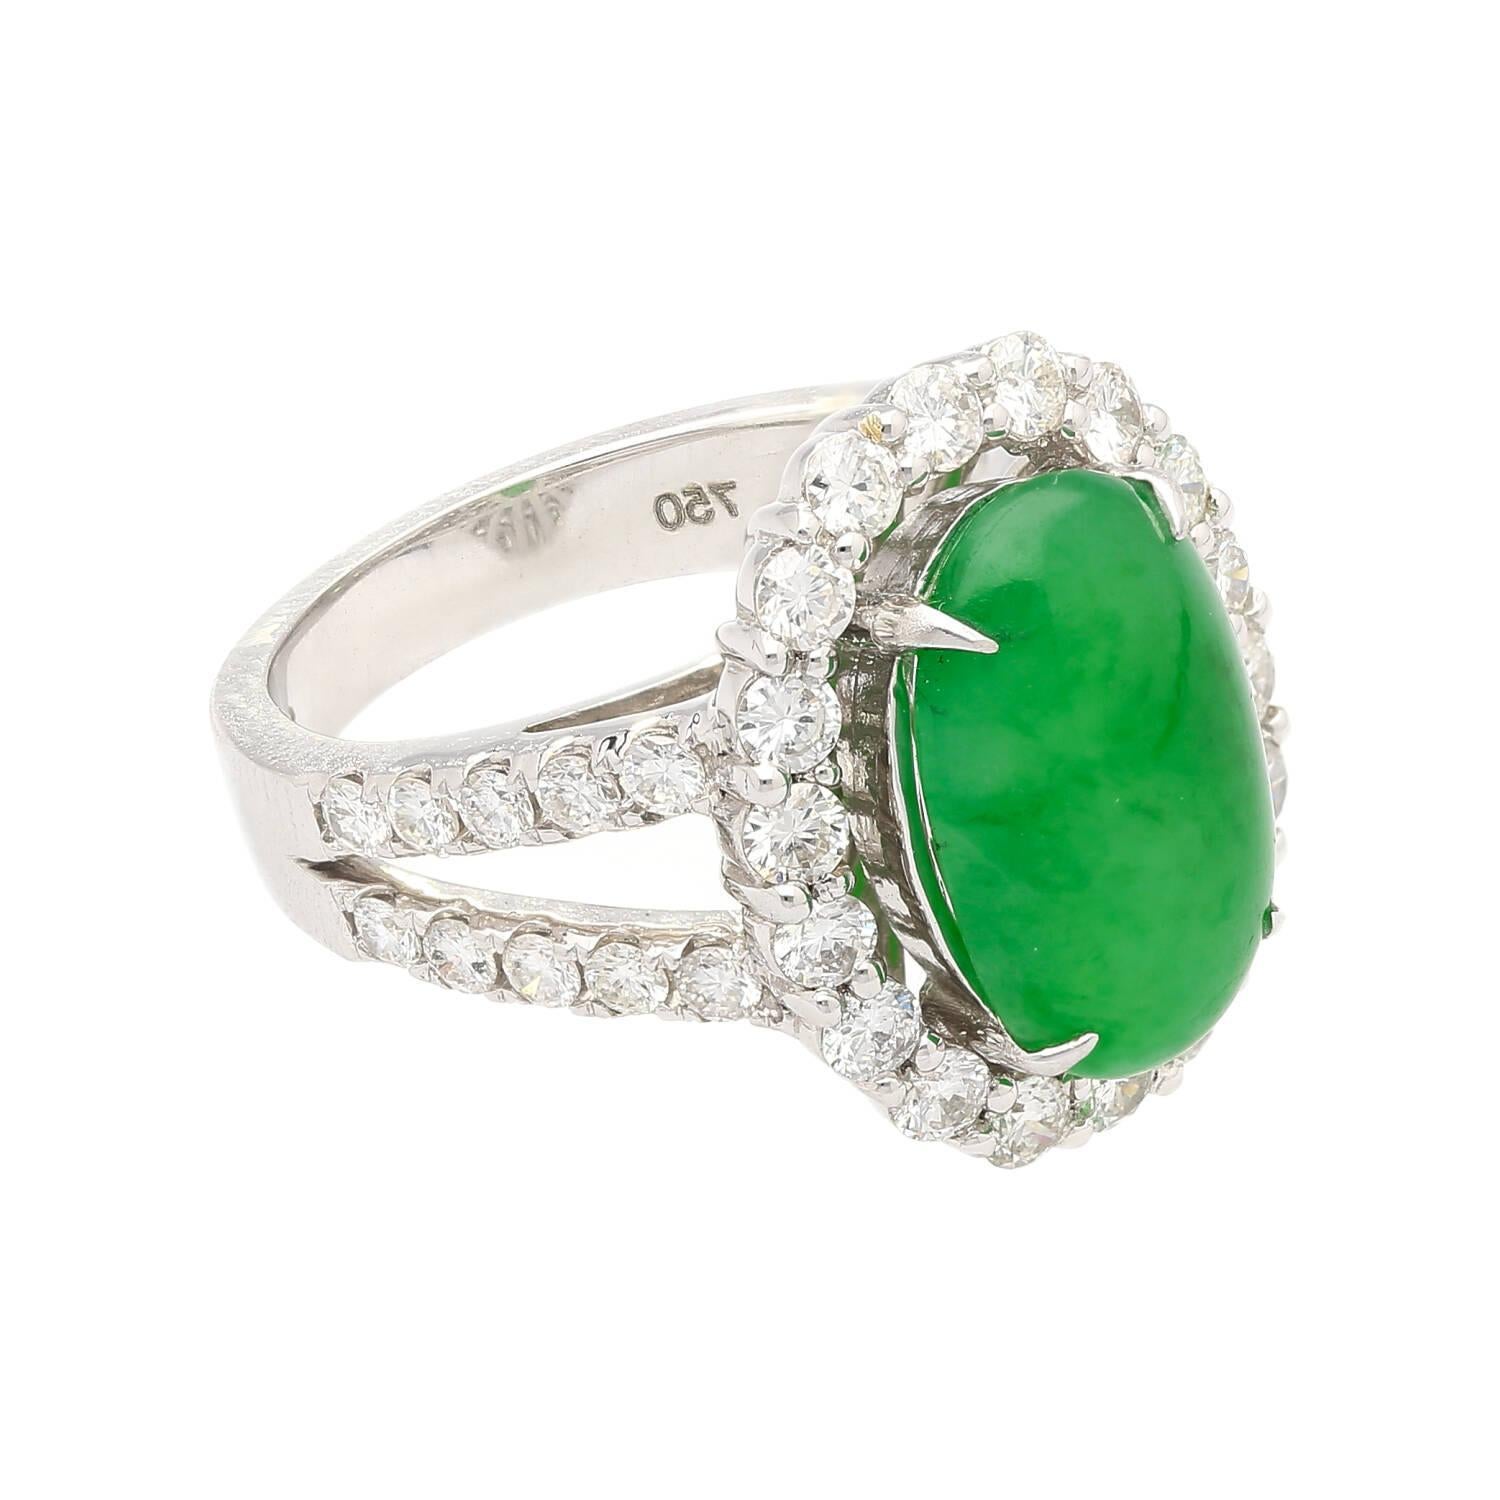 HK Lab Certified 5.329 Carat Jade and Diamond Halo Ring in 18K White Gold For Sale 3